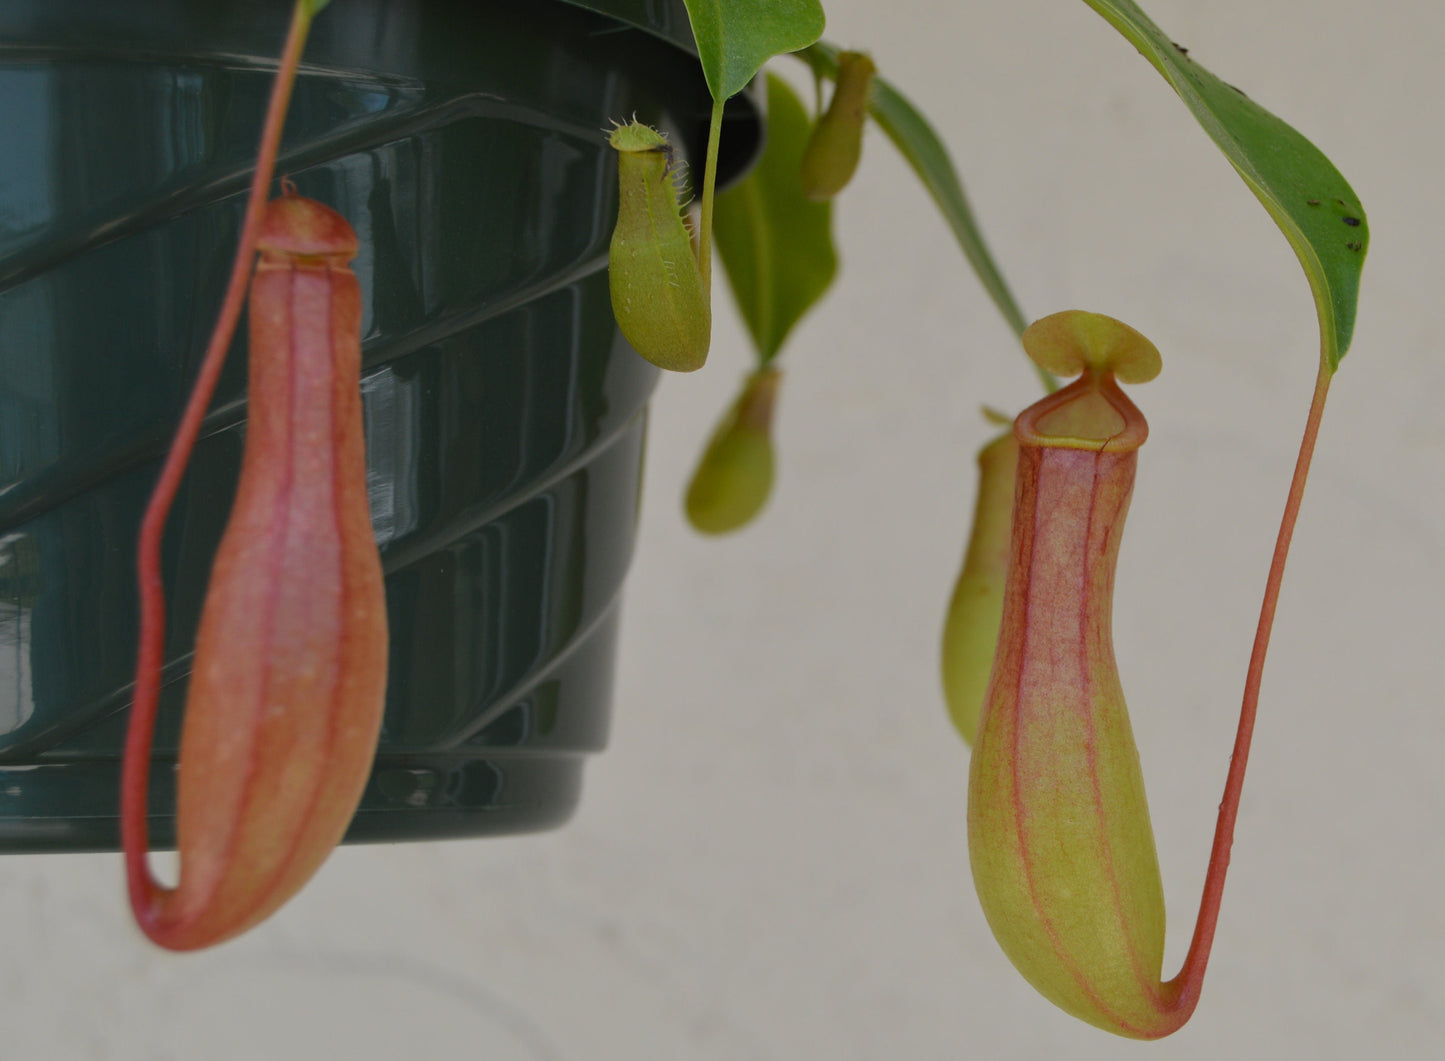 nepenthes alata carnivorous pitcher plant 6 inch hanging basket easy to grow with multiple red and green pitchers with long slender leaves